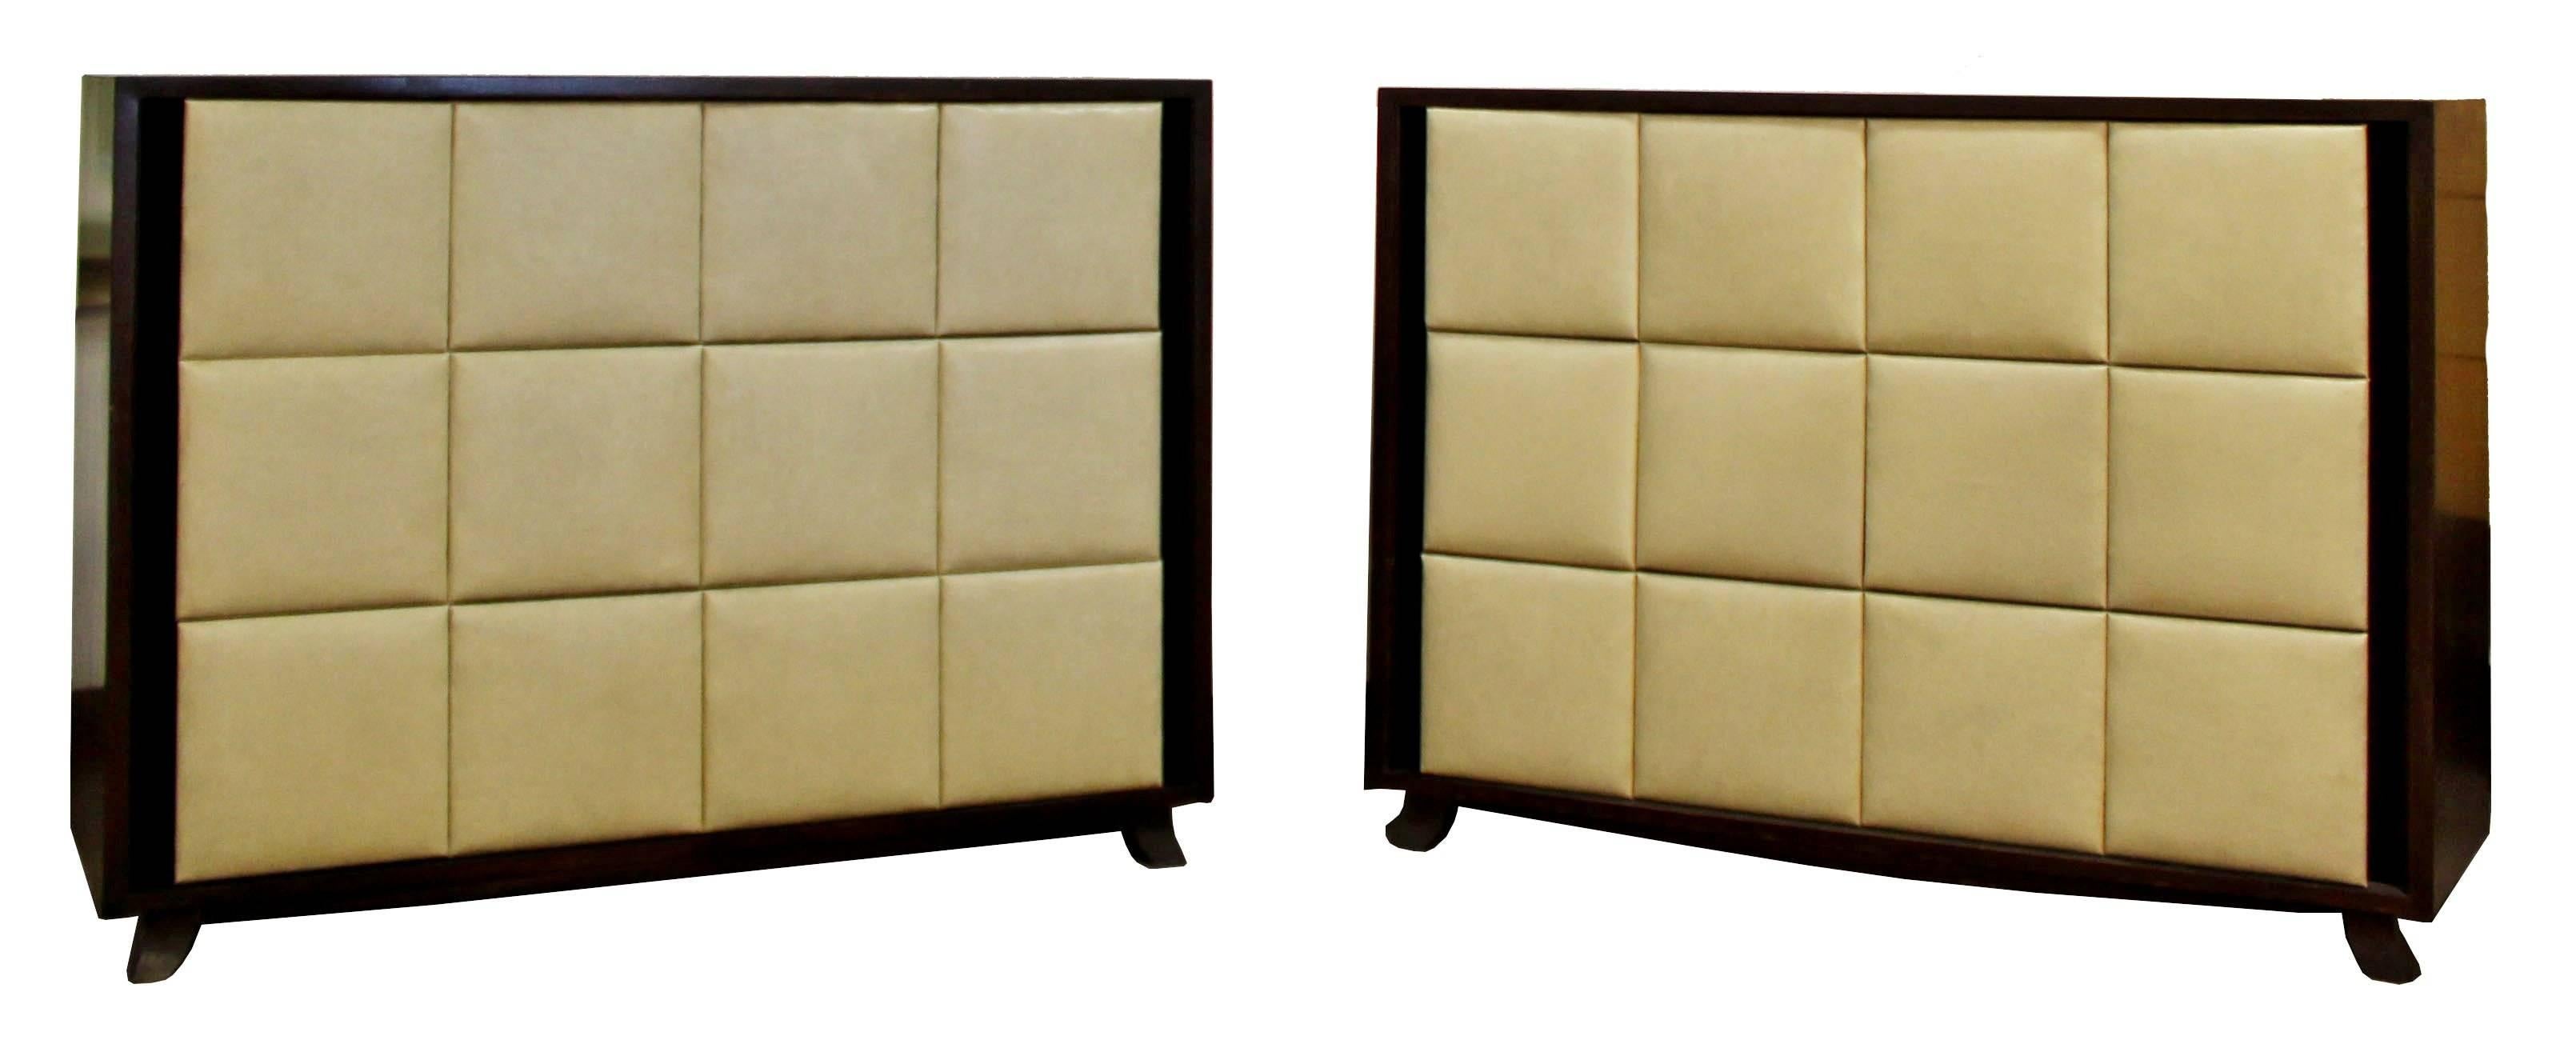 For your consideration is an incredible, seven piece, bedroom set, made of mahogany with padded cream leather shelves, by Gilbert Rohde for Herman Miller, circa the 1930s. In excellent condition, amazing for its age. The dimensions of the pair of